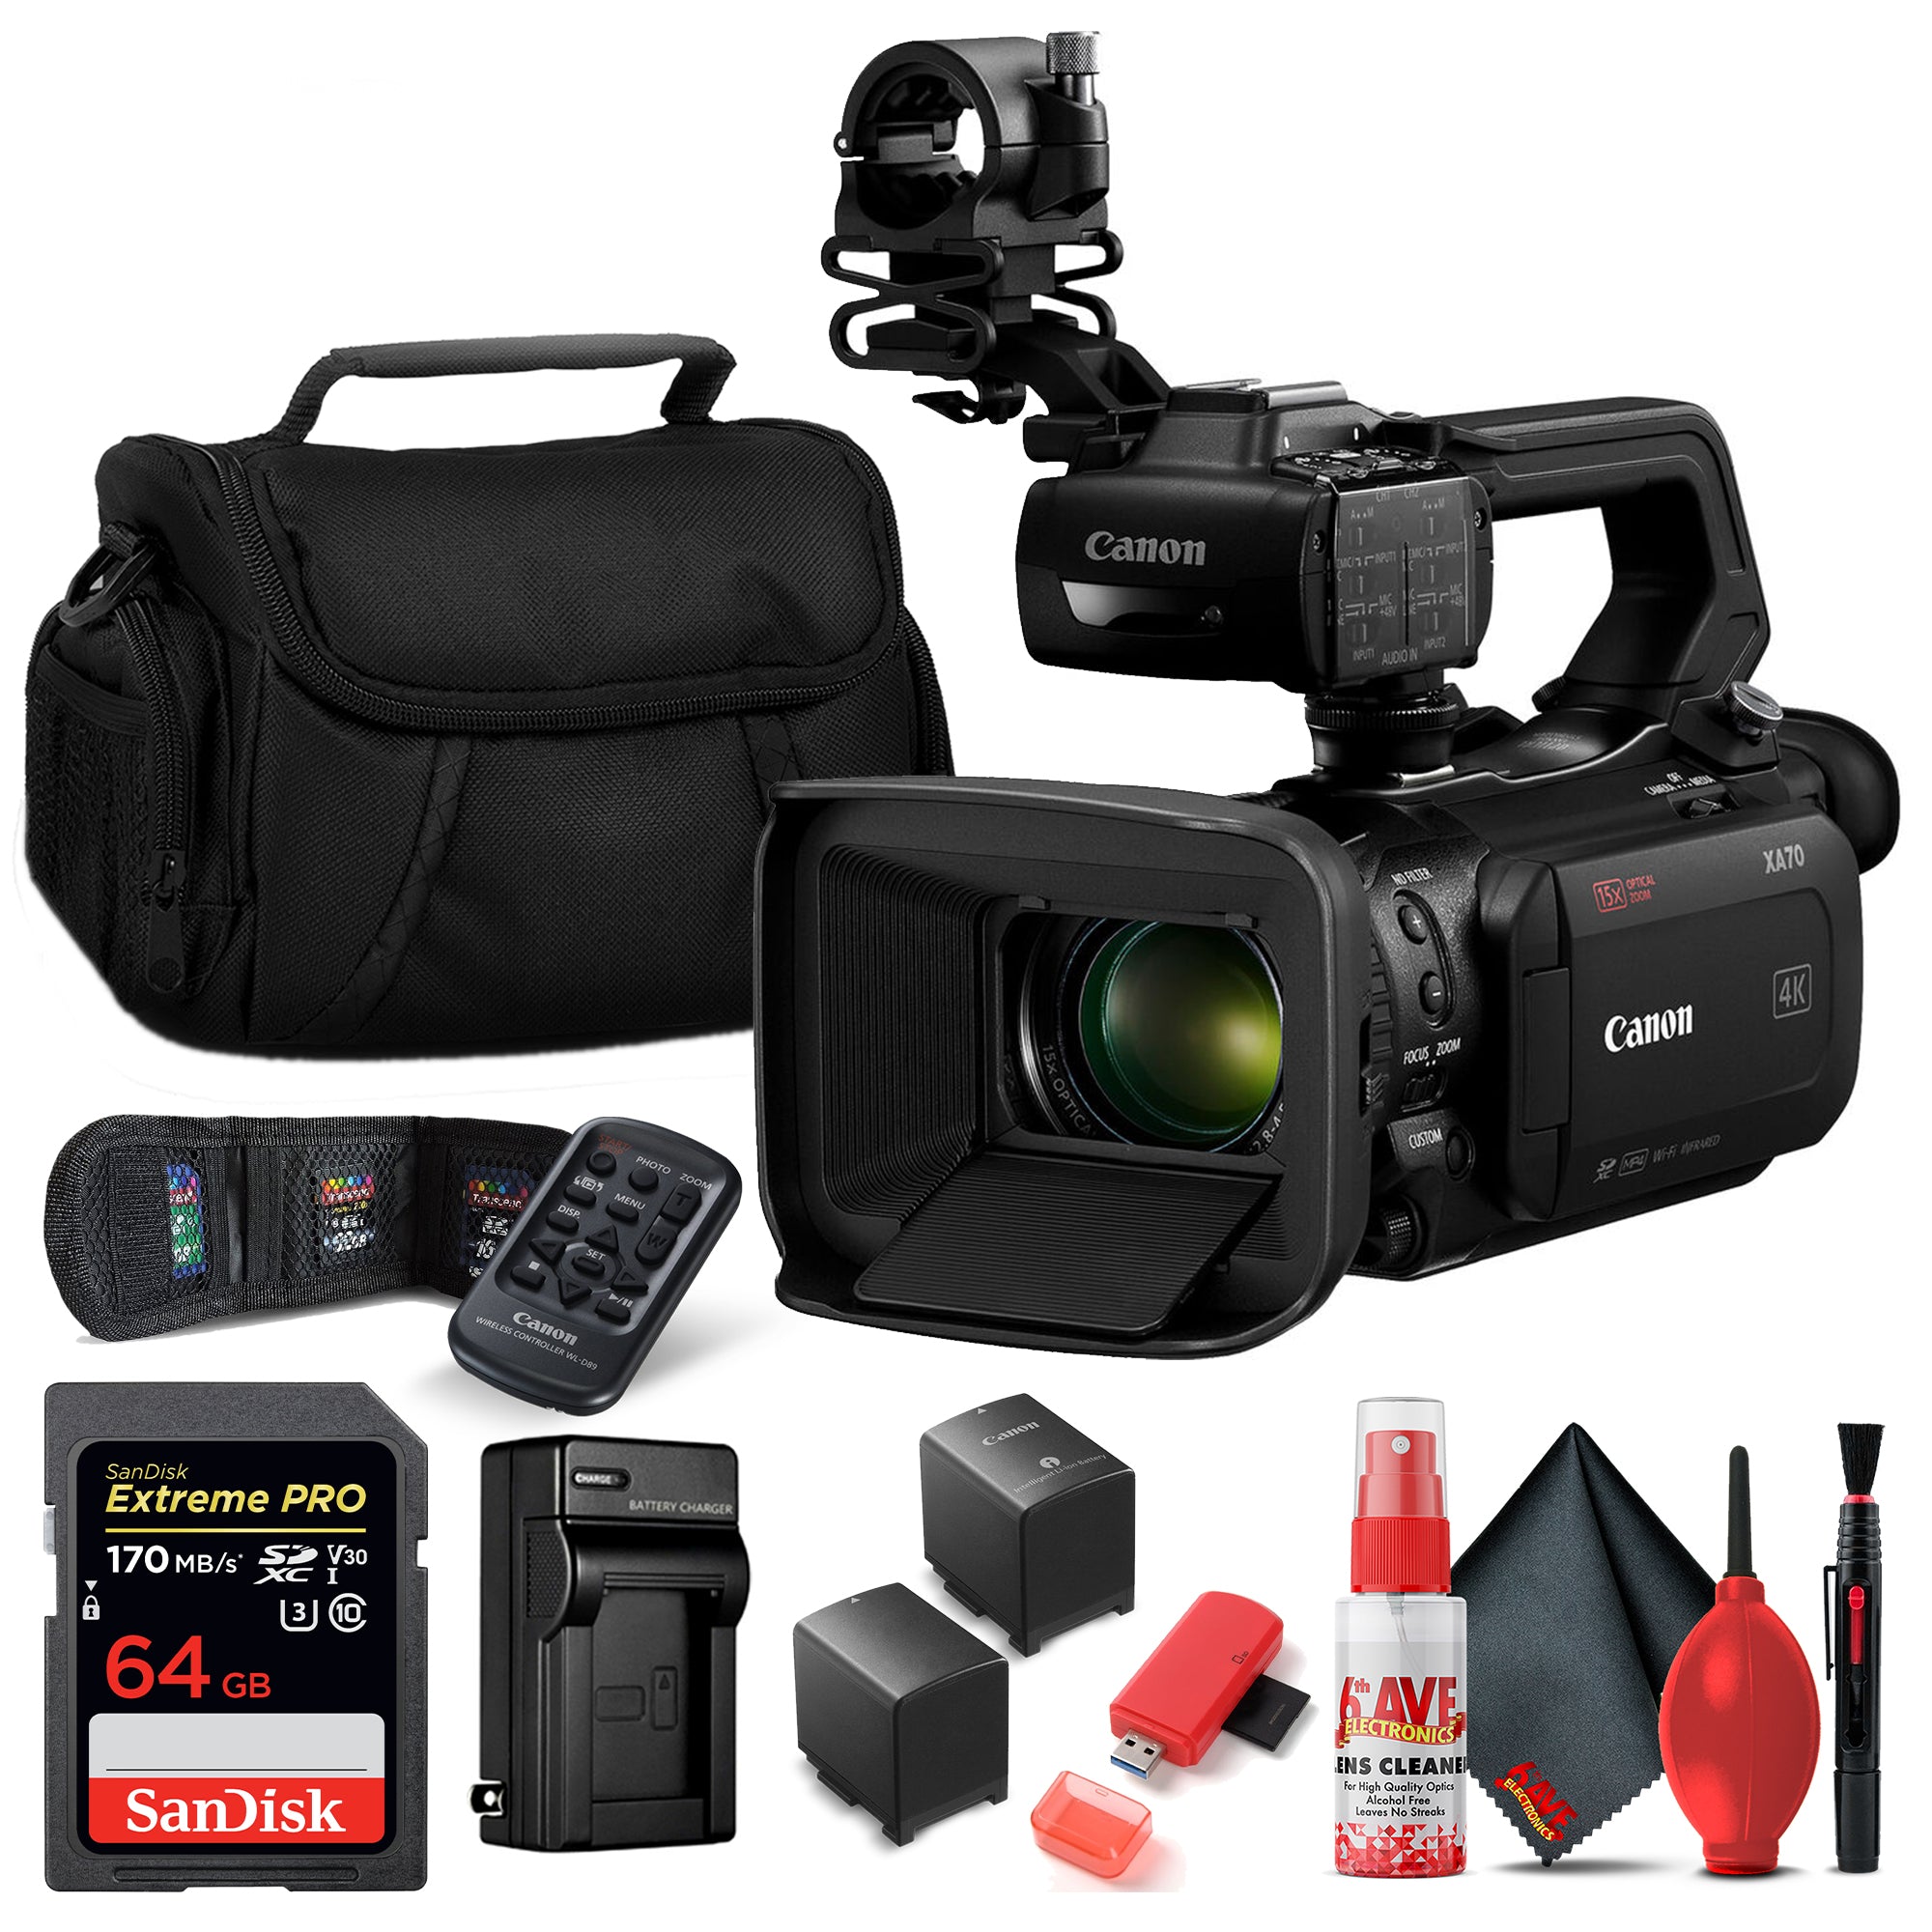 Canon XA70 Camcorder + 64GB Card, Extra Battery/Charger & more accessories